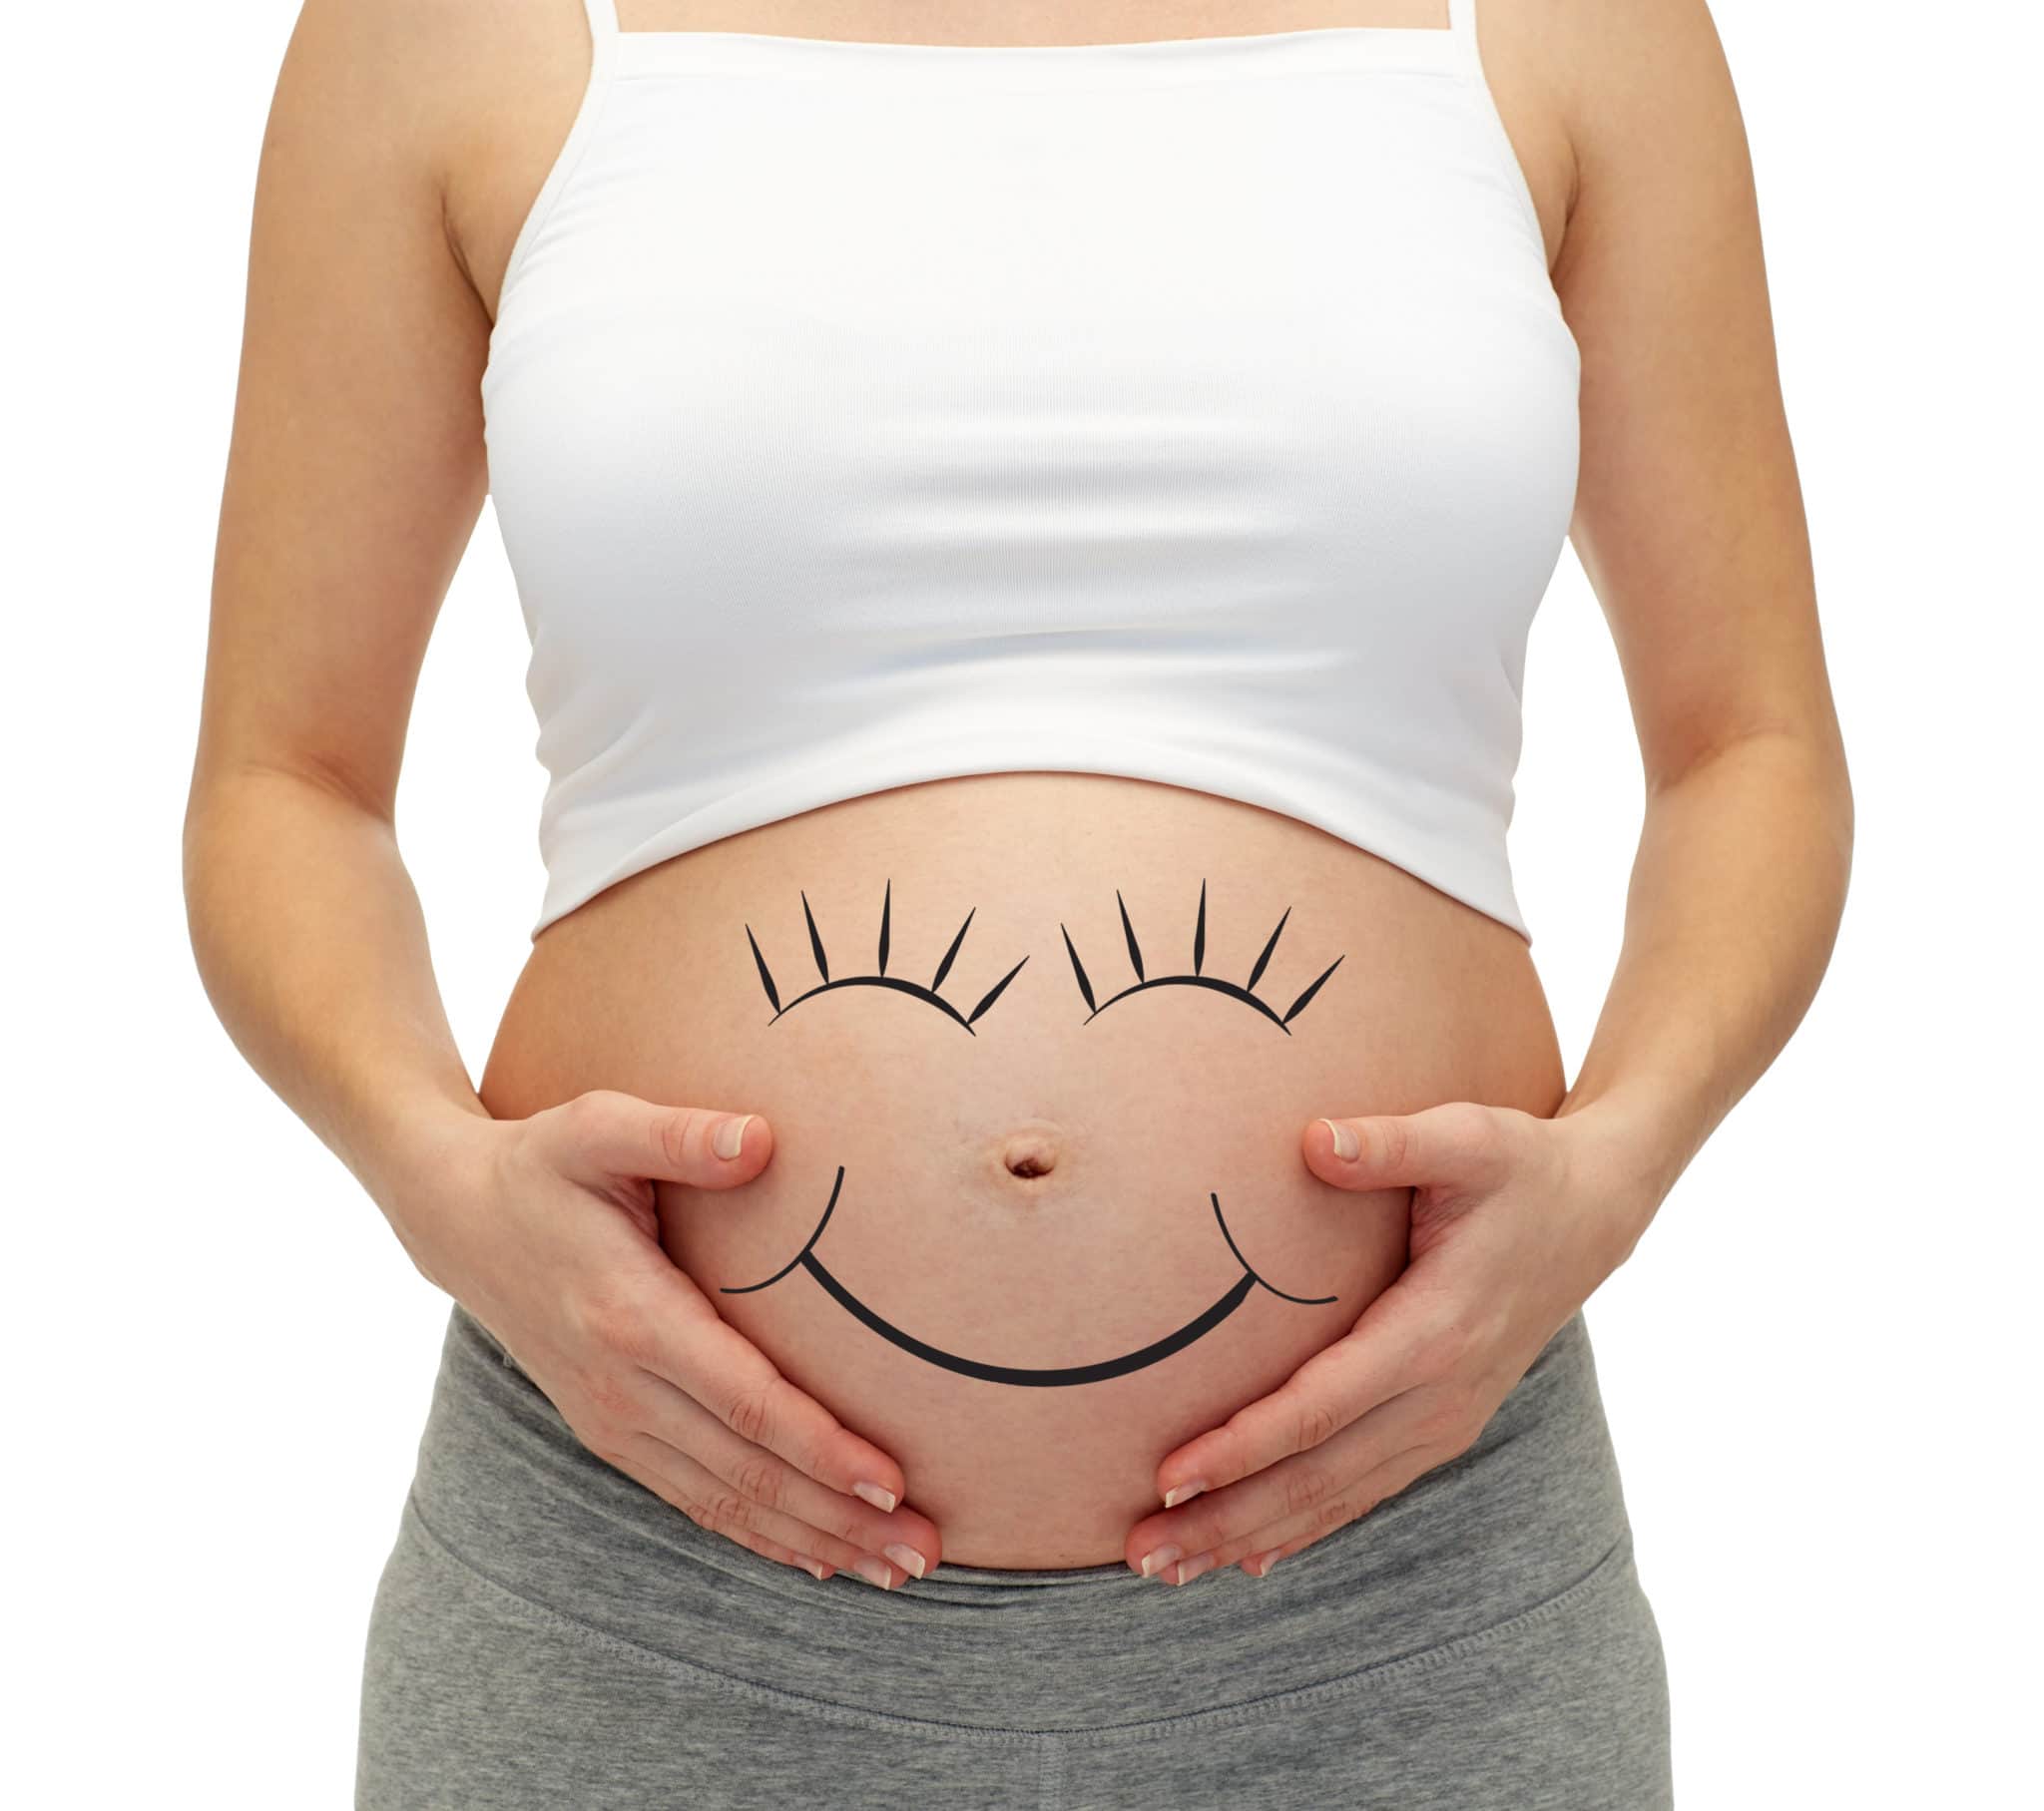 become a Single Mother Through Surrogacy